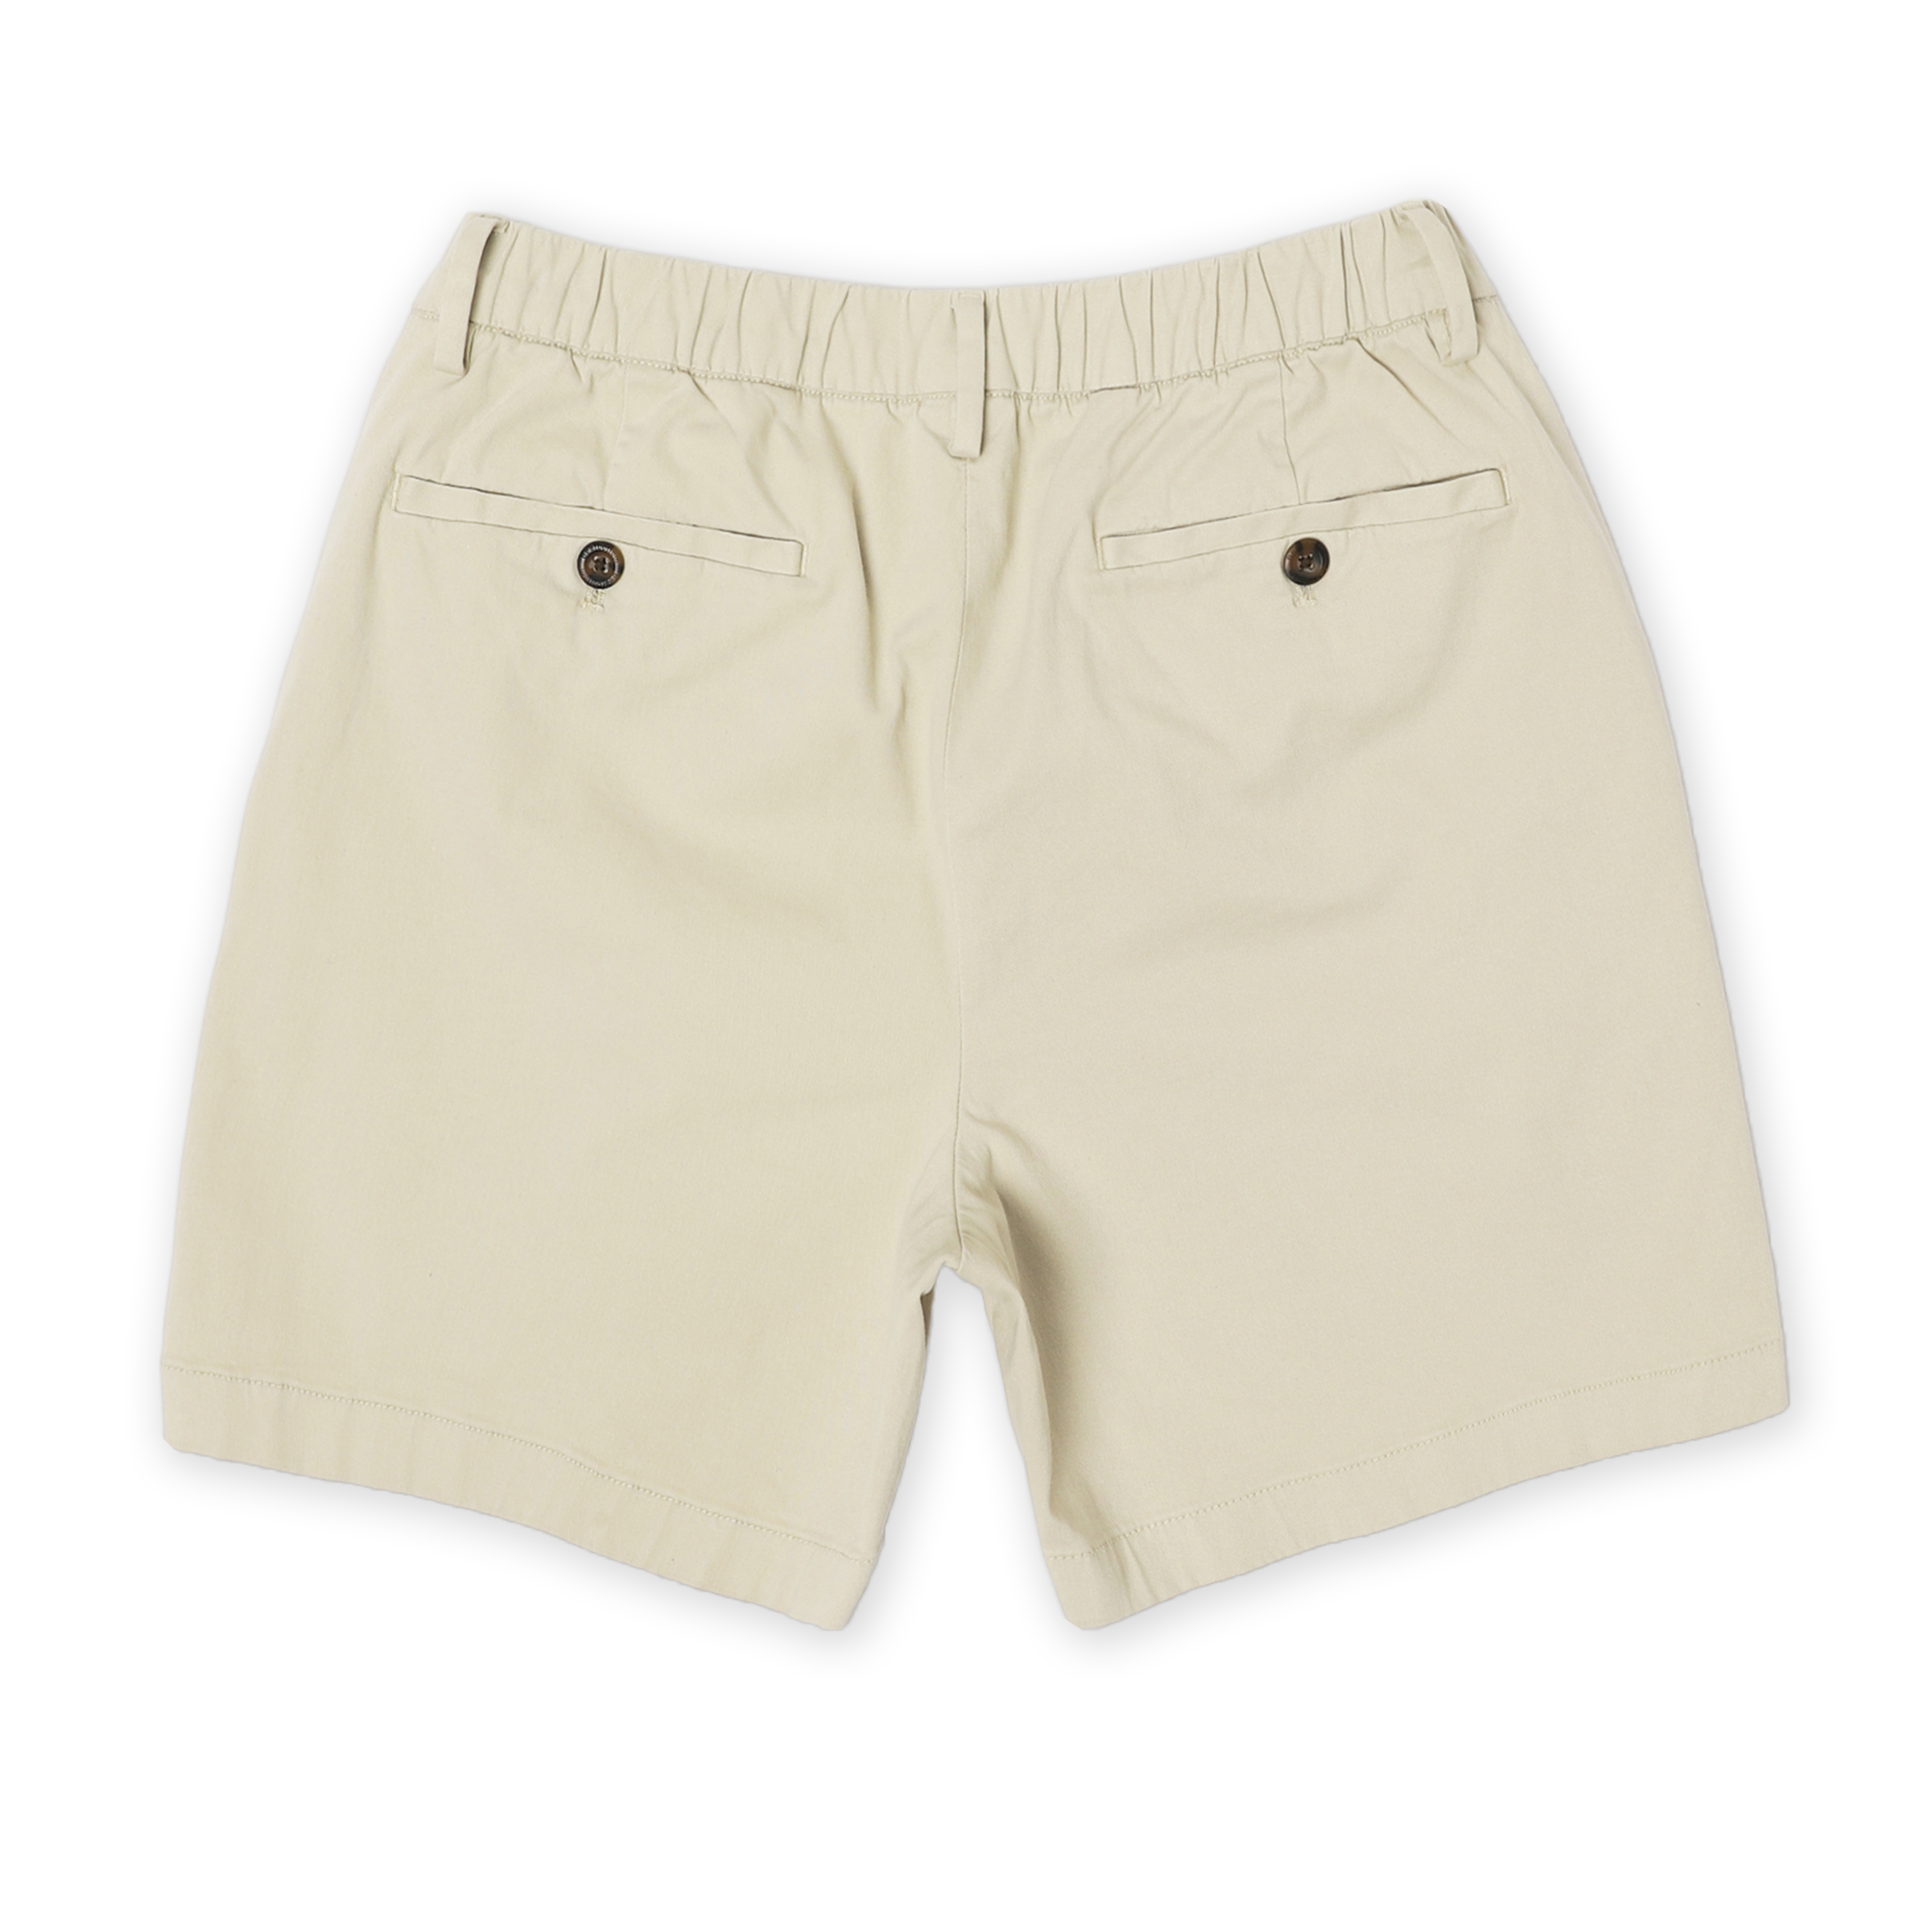 Stretch Chino Short 7" in Stone back with elastic waistband, belt loops, and two buttoned welt pockets